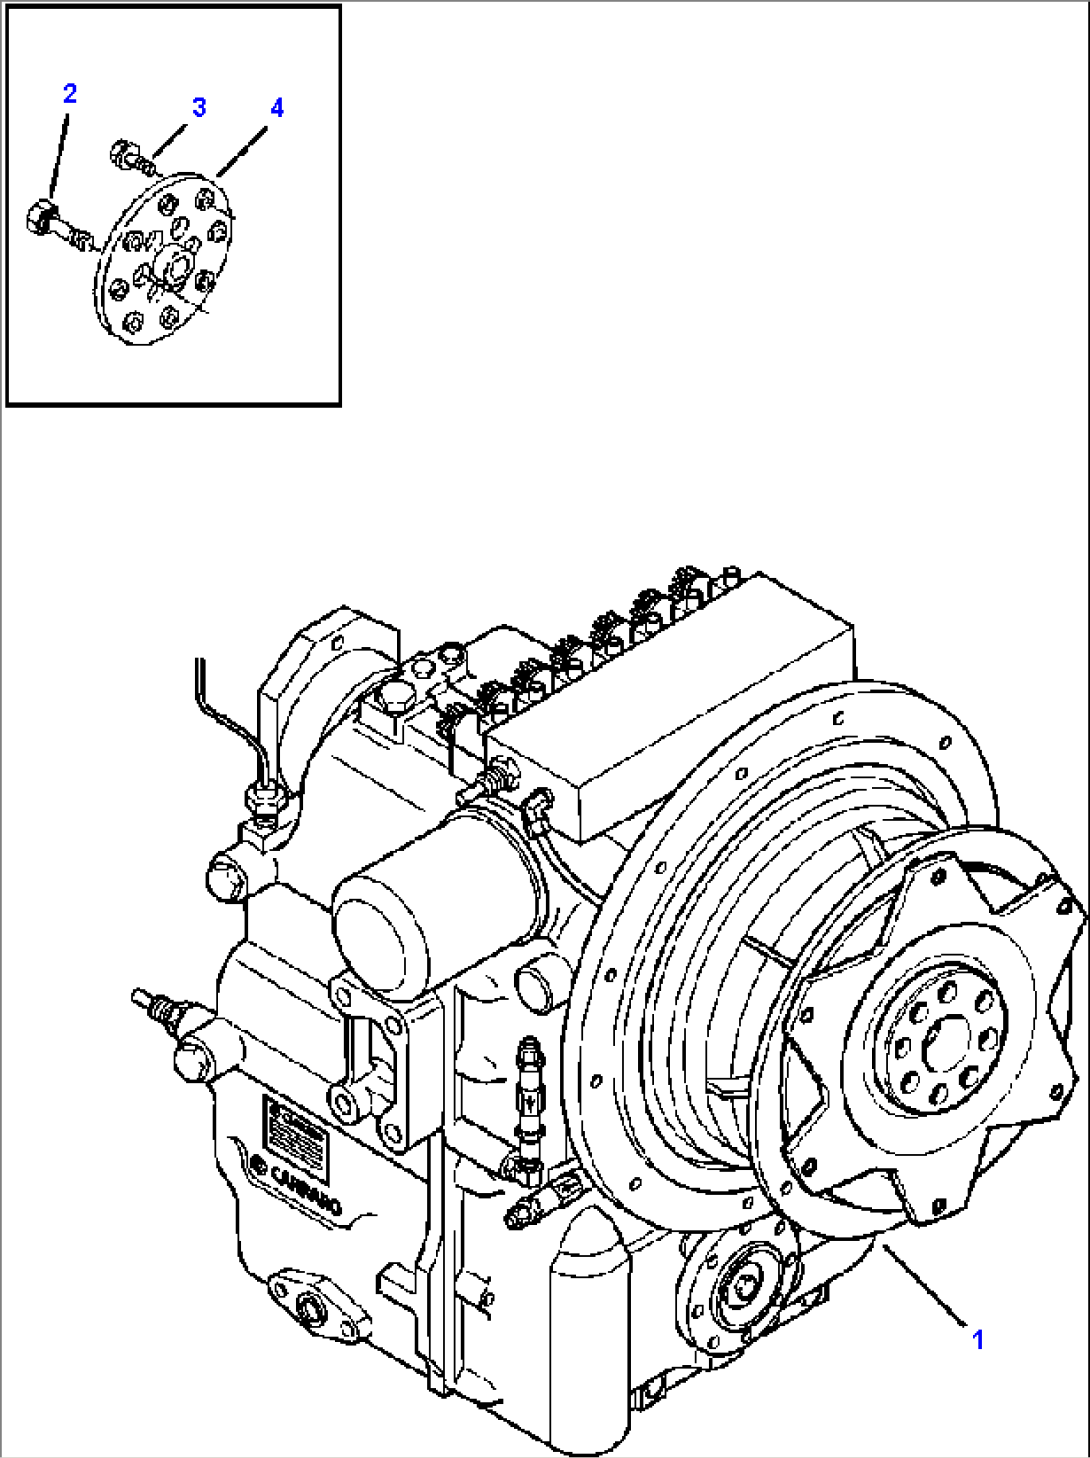 FIG. F3220-01A0 TRANSMISSION - COMPLETE ASSEMBLY